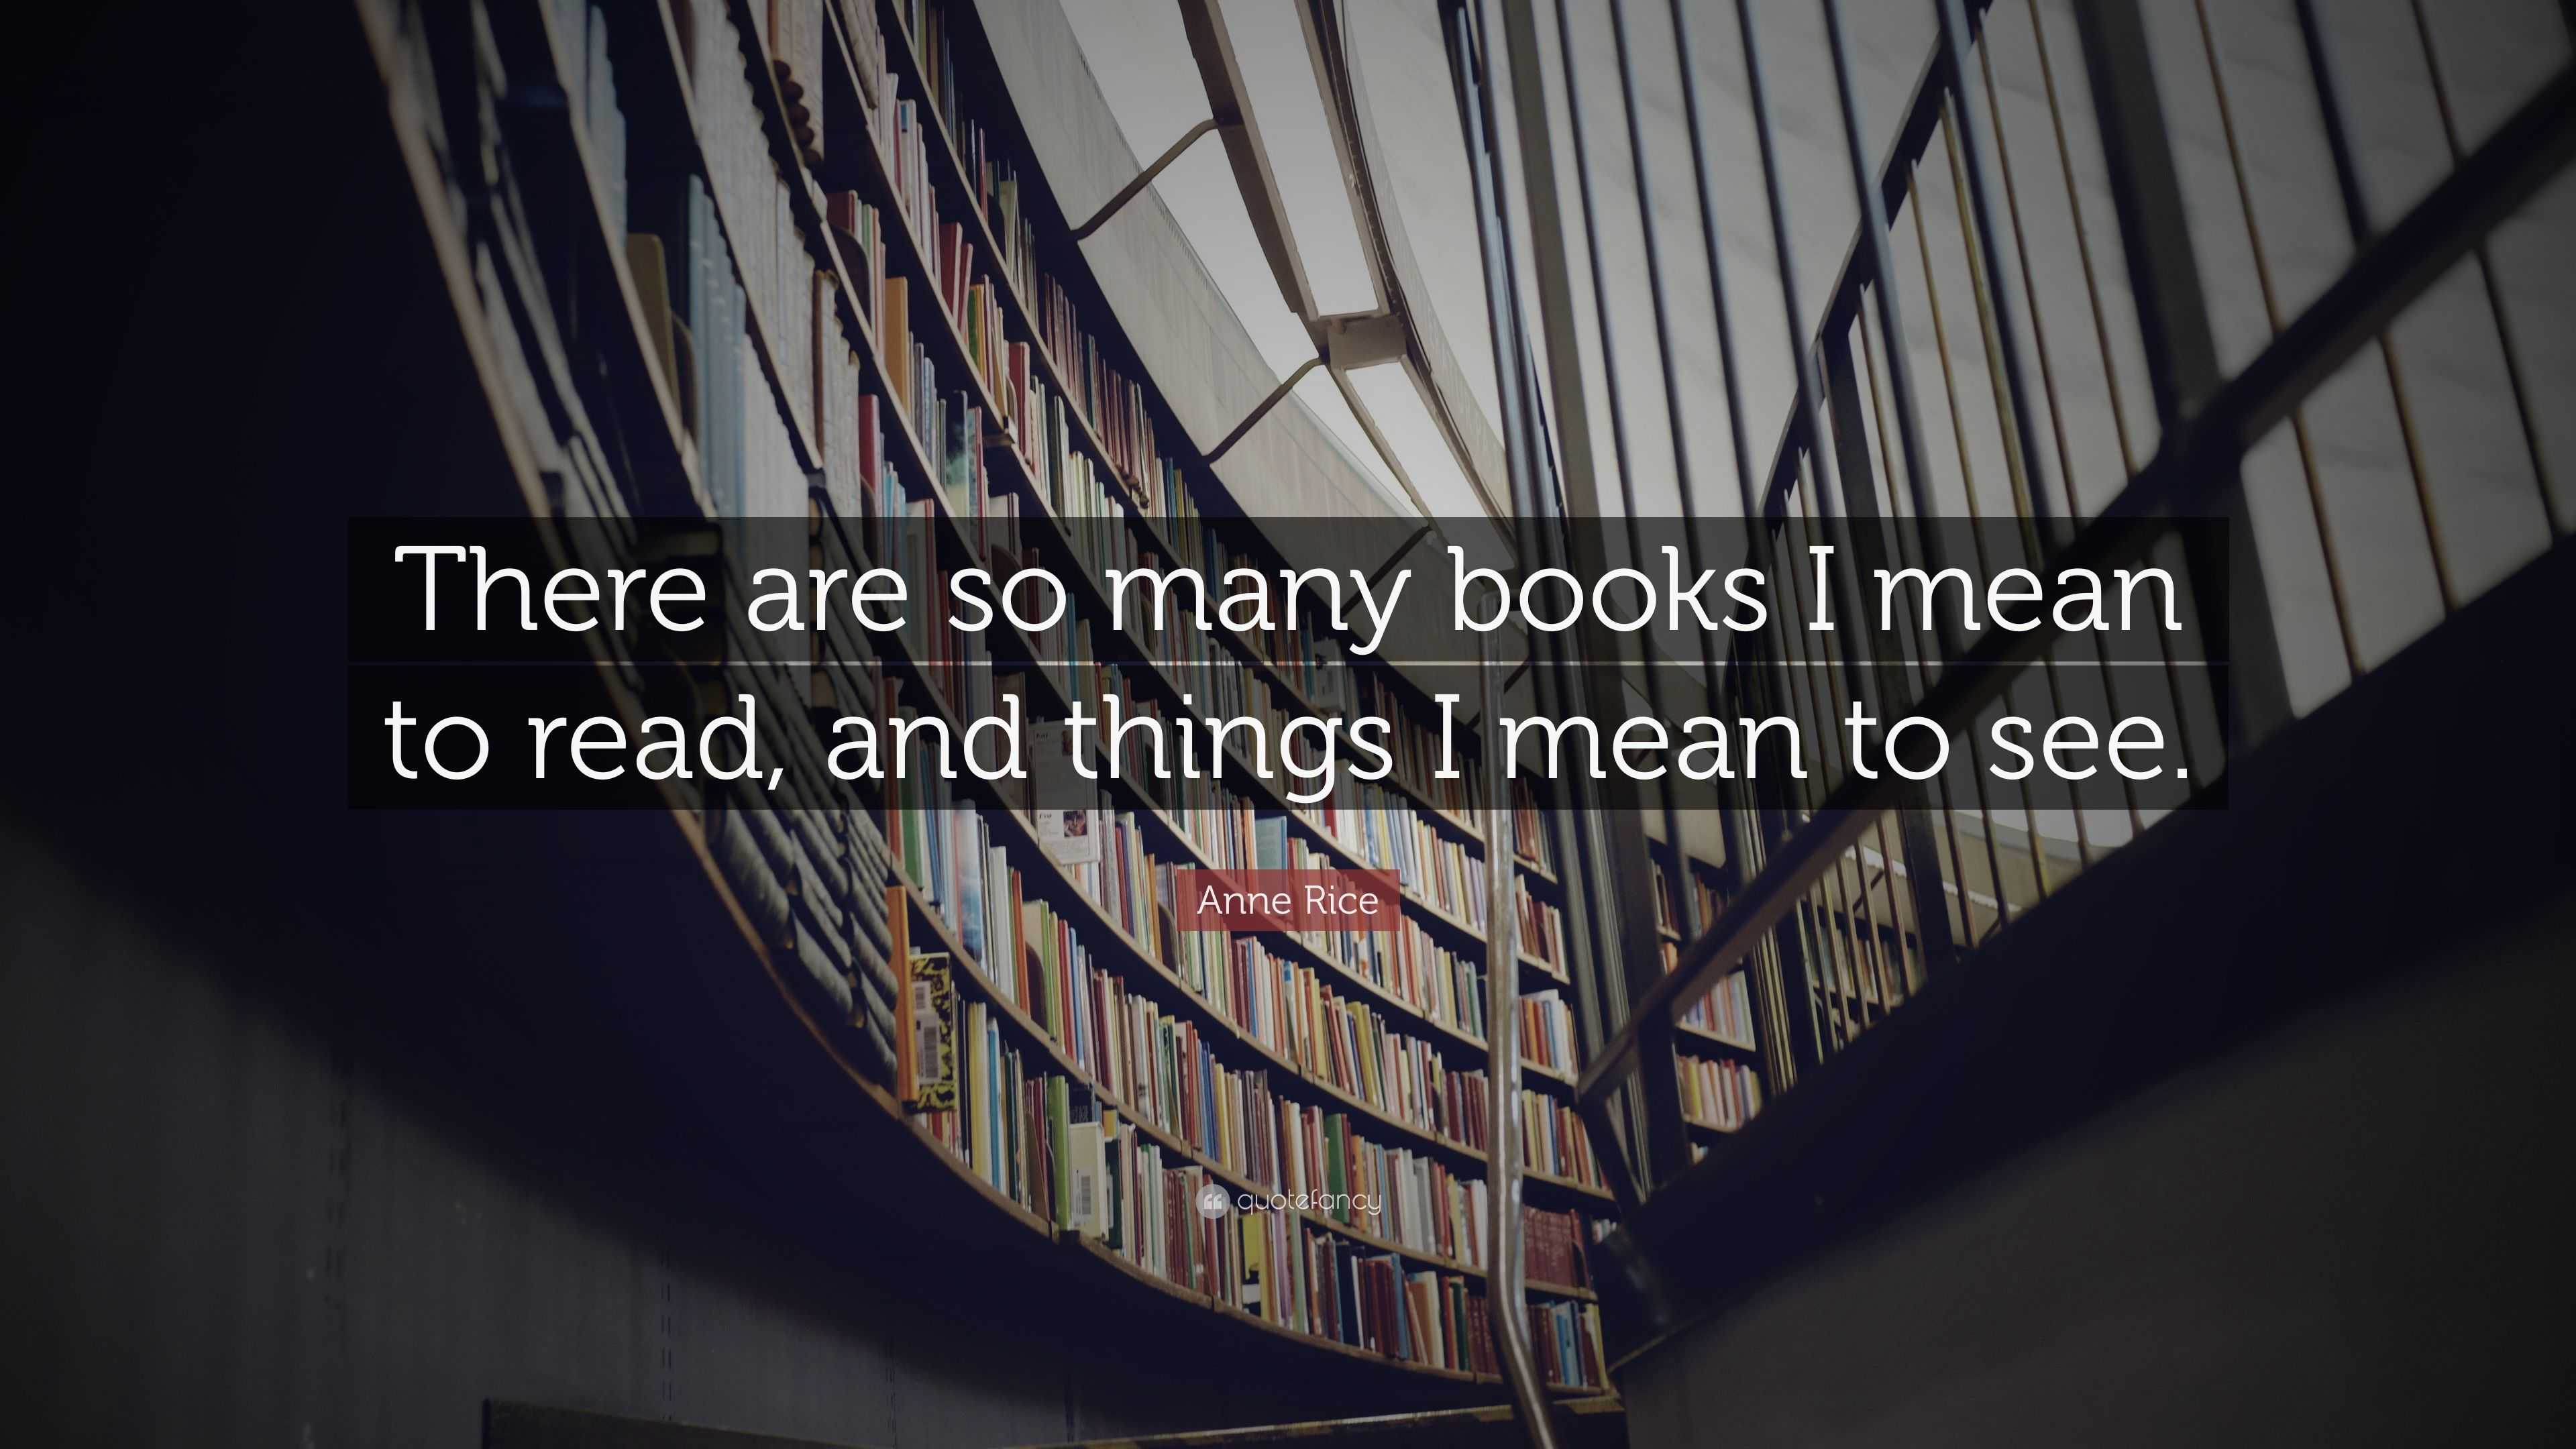 Anne Rice Quote: “There are so many books I mean to read, and things I ...